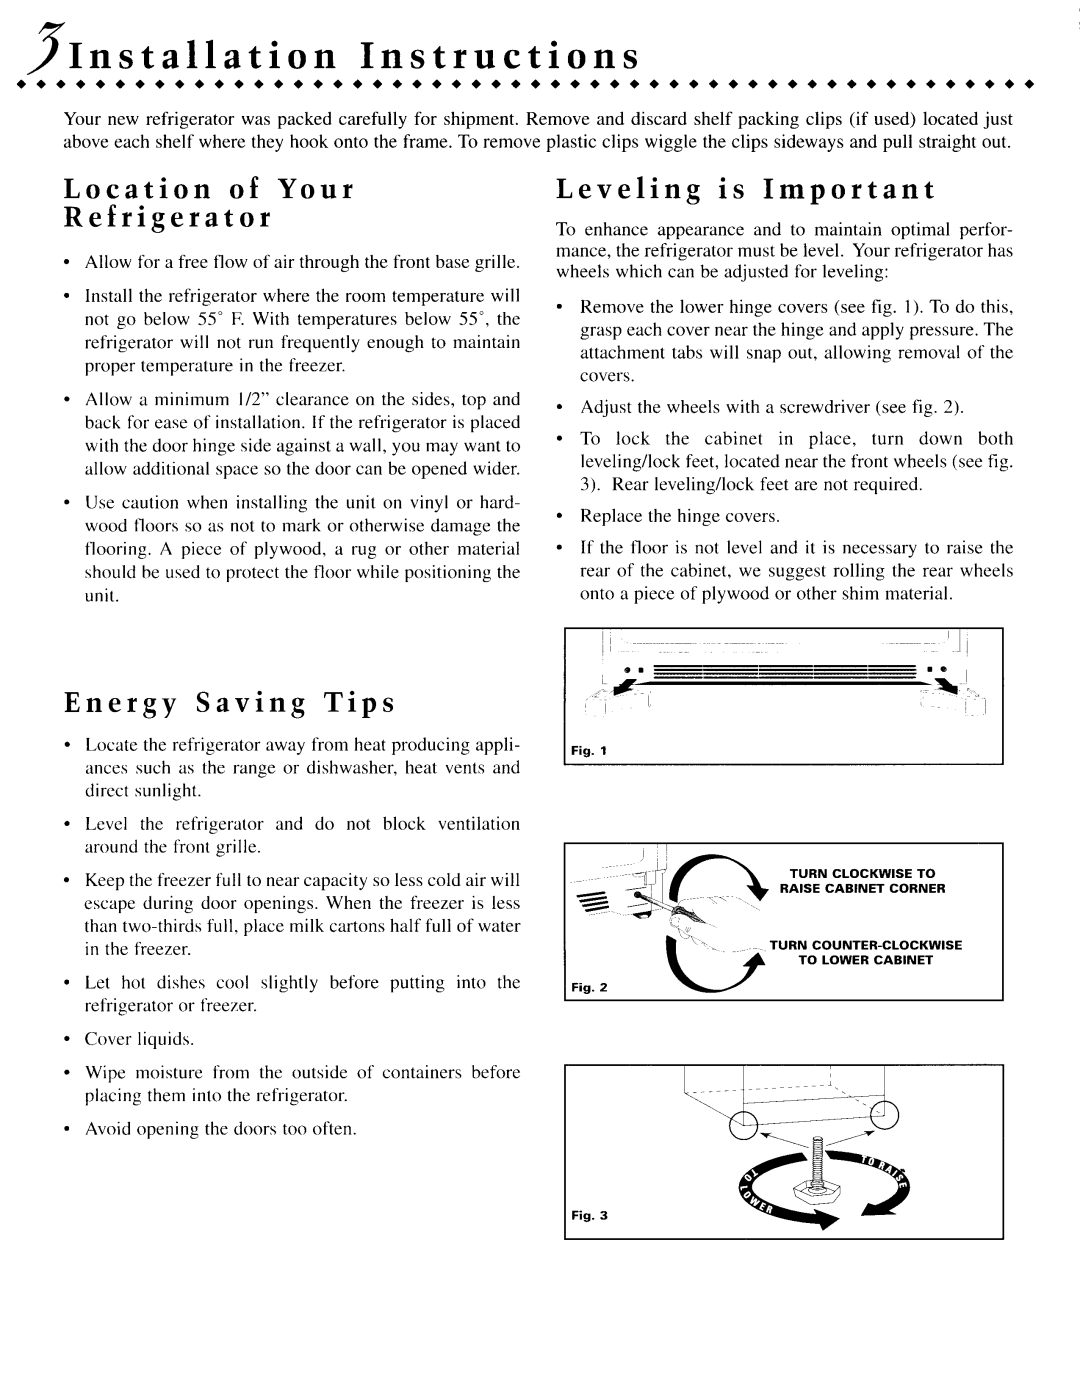 Jenn-Air JCD2389DEW sInstallation Instructions, Location of Your Refrigerator, Energy Saving Tips, Leveling is Important 